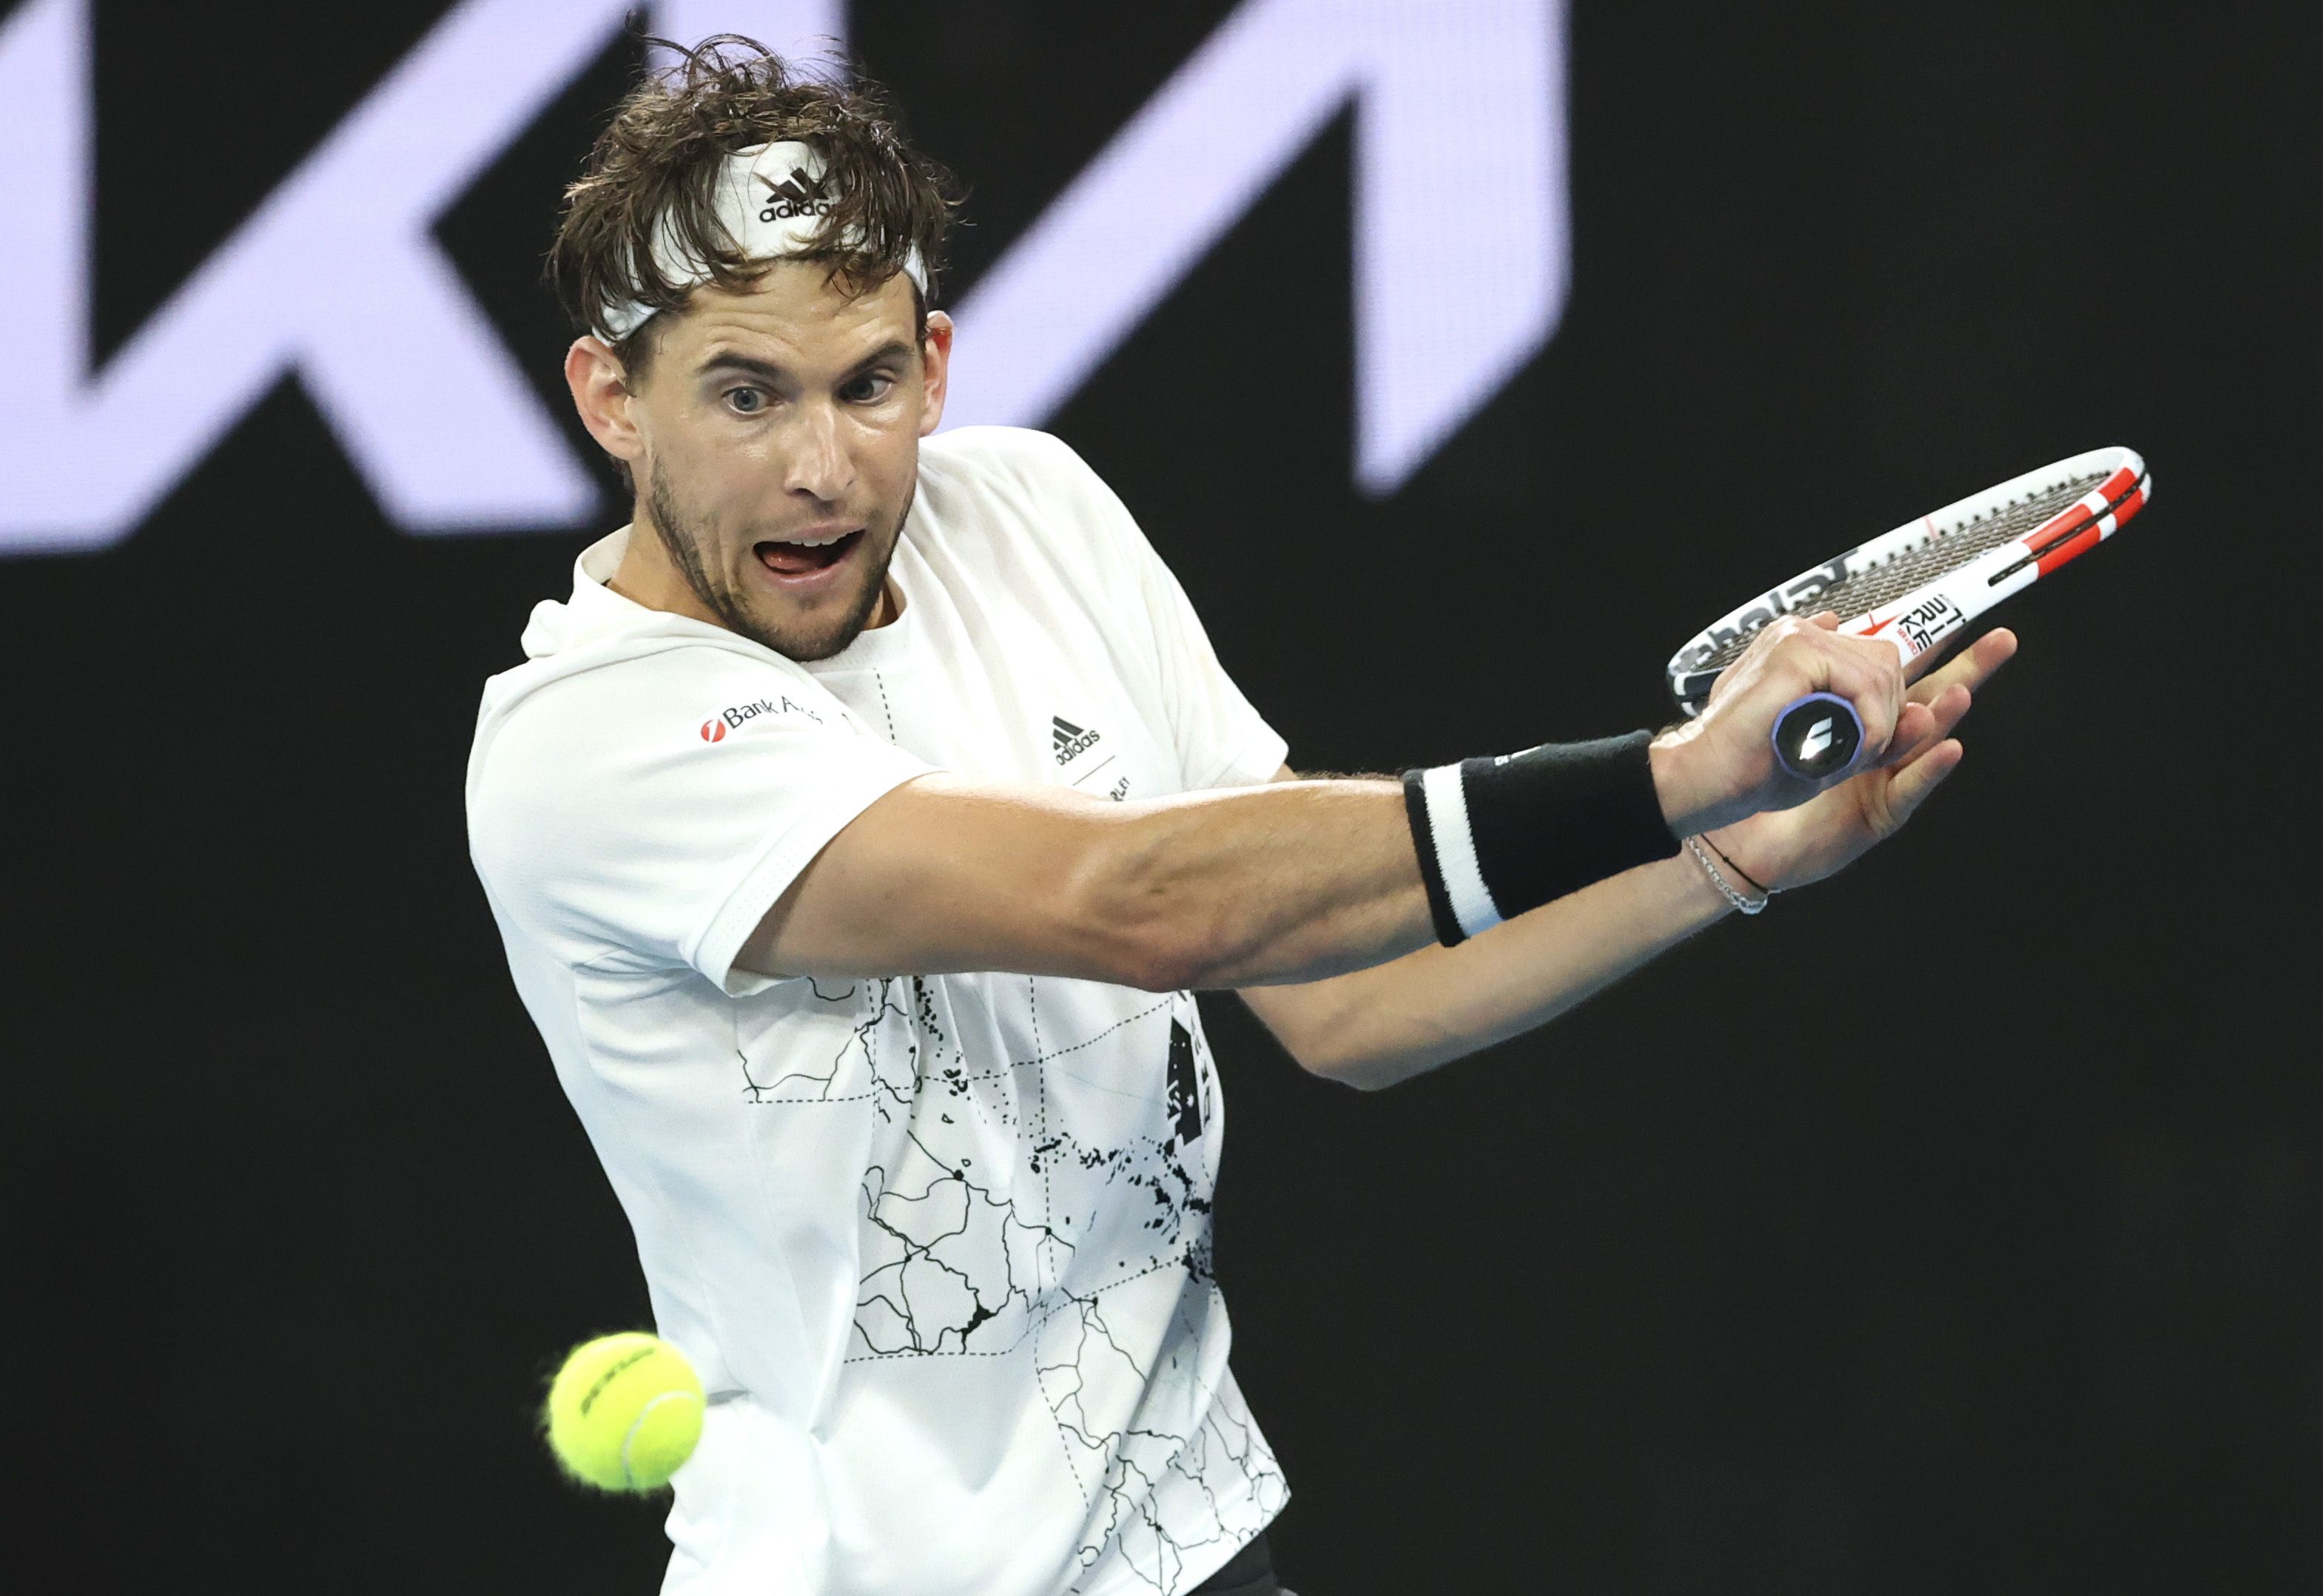 Australian Open 2021: Round of 16 TV channel, schedule, live stream | How to watch Slam tennis syracuse.com